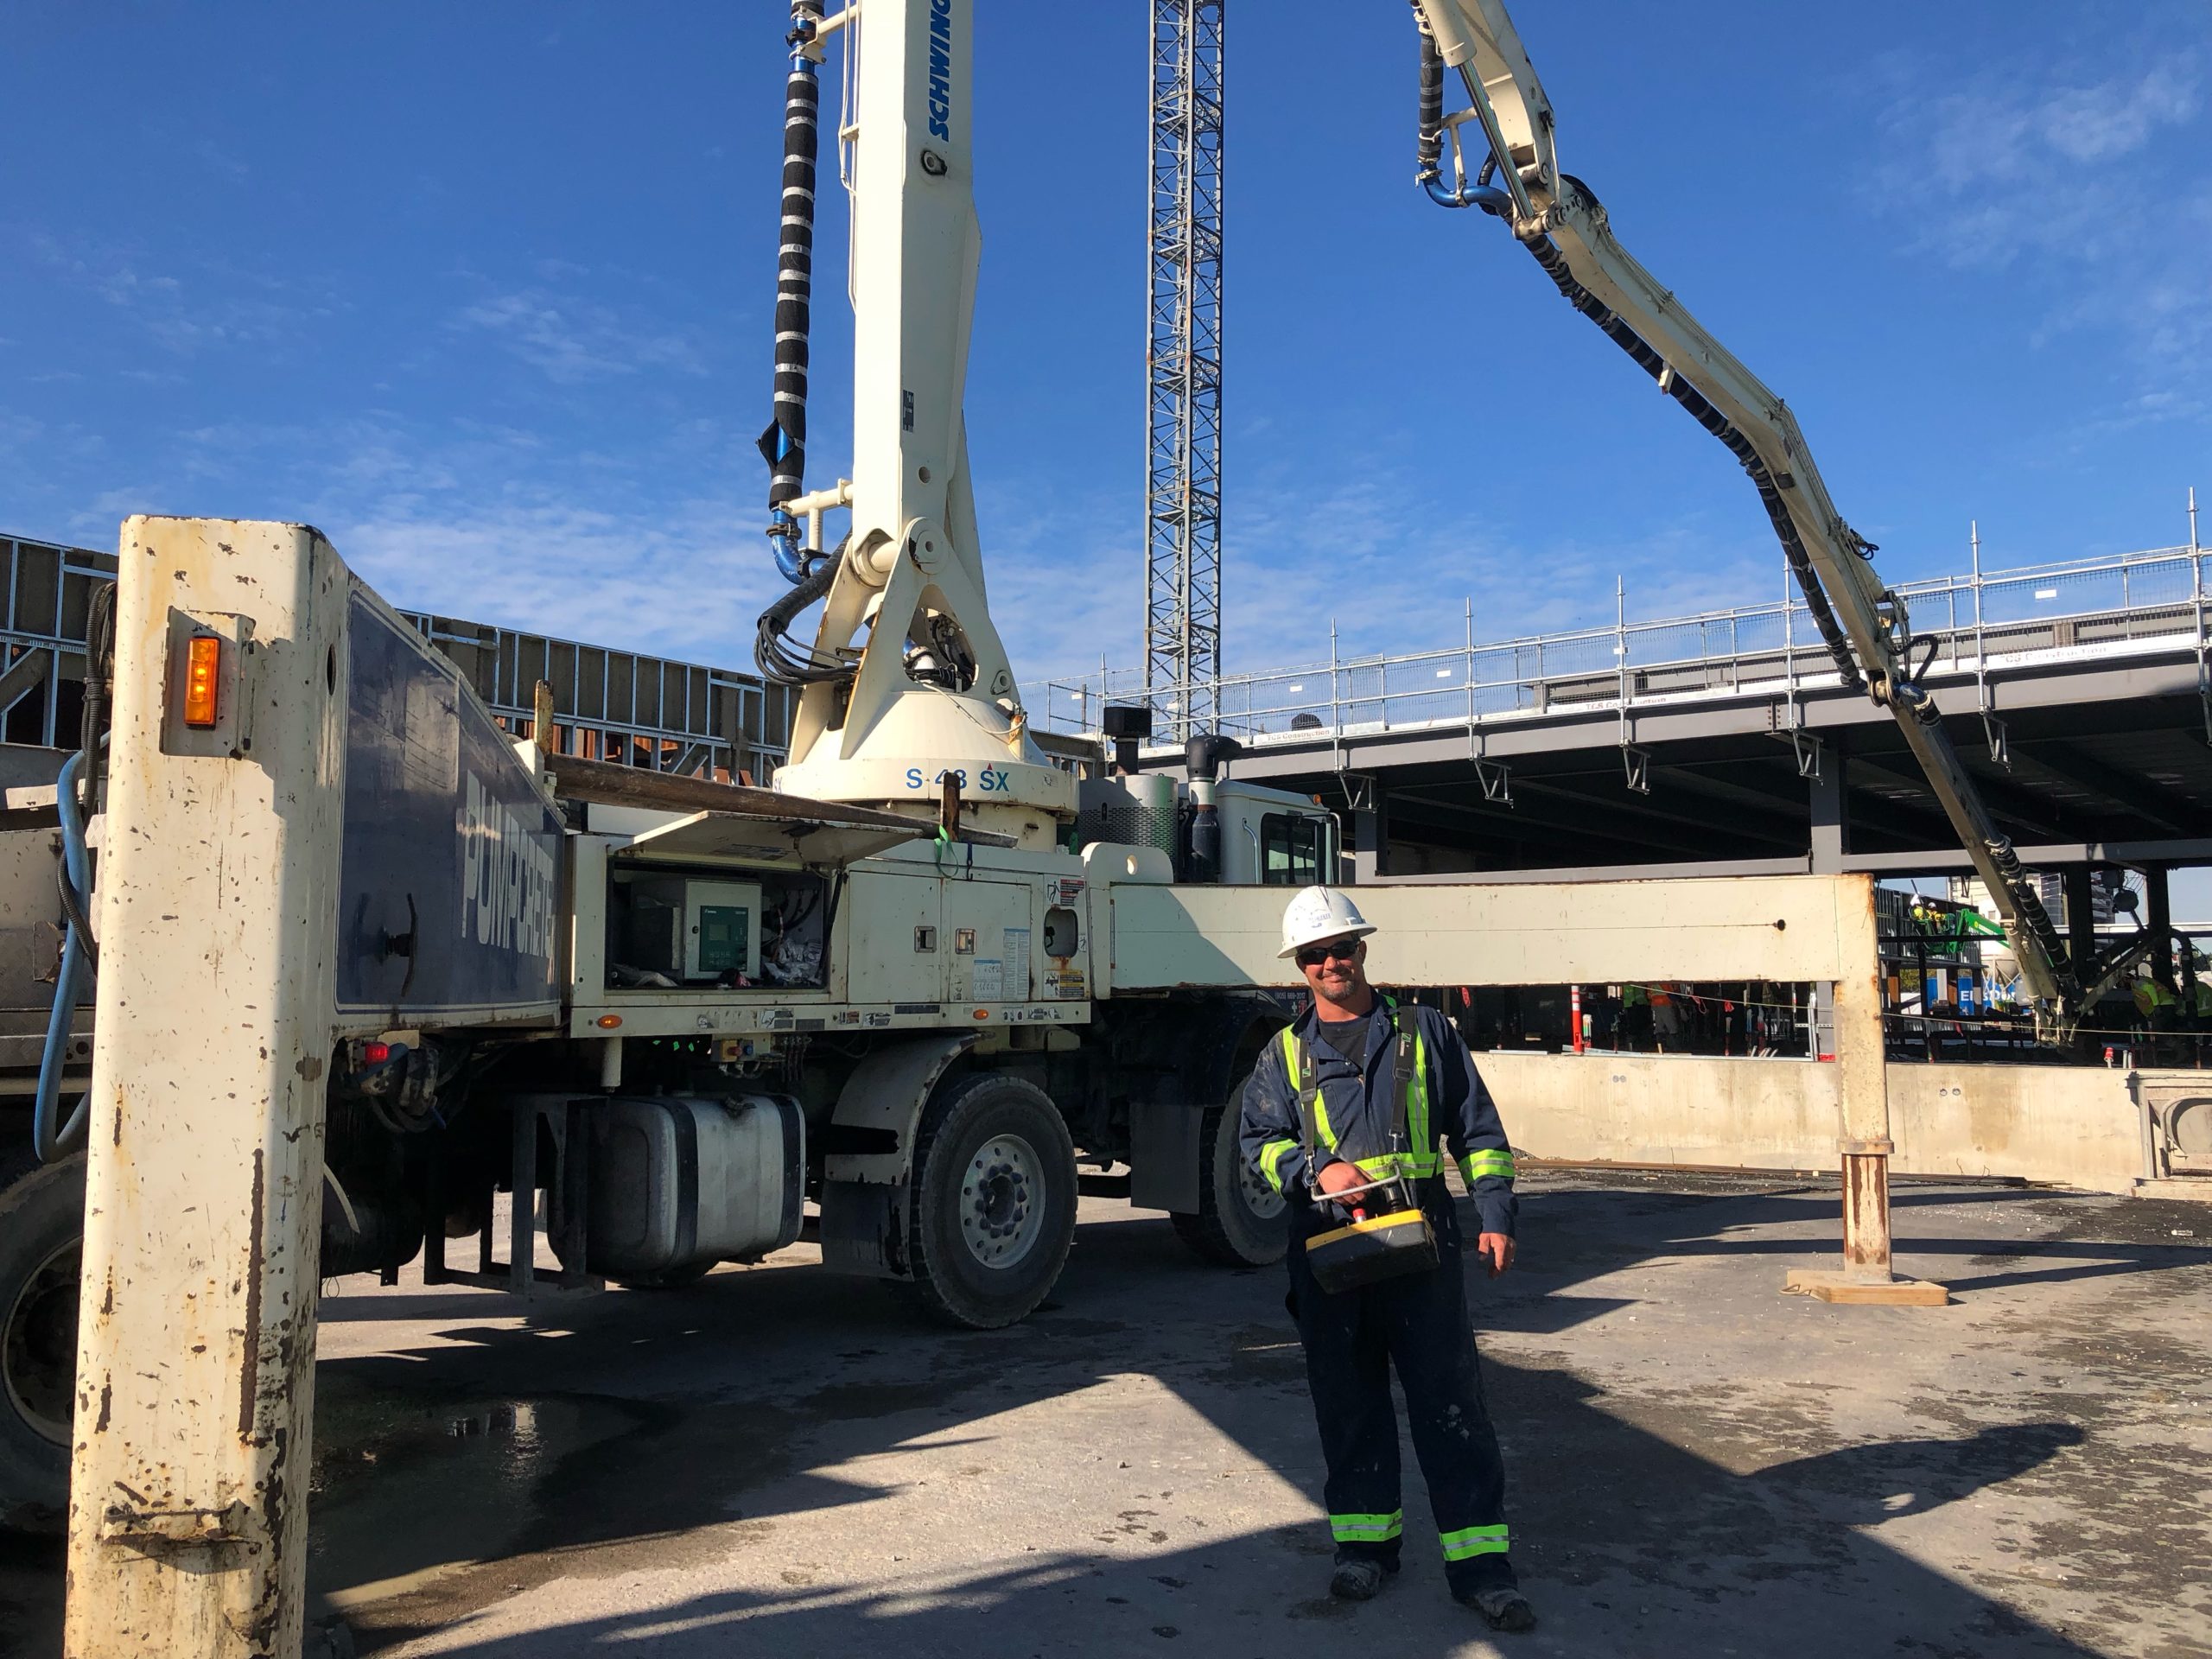 Harley Moco is operating a Schwing S-48 SX concrete pump.